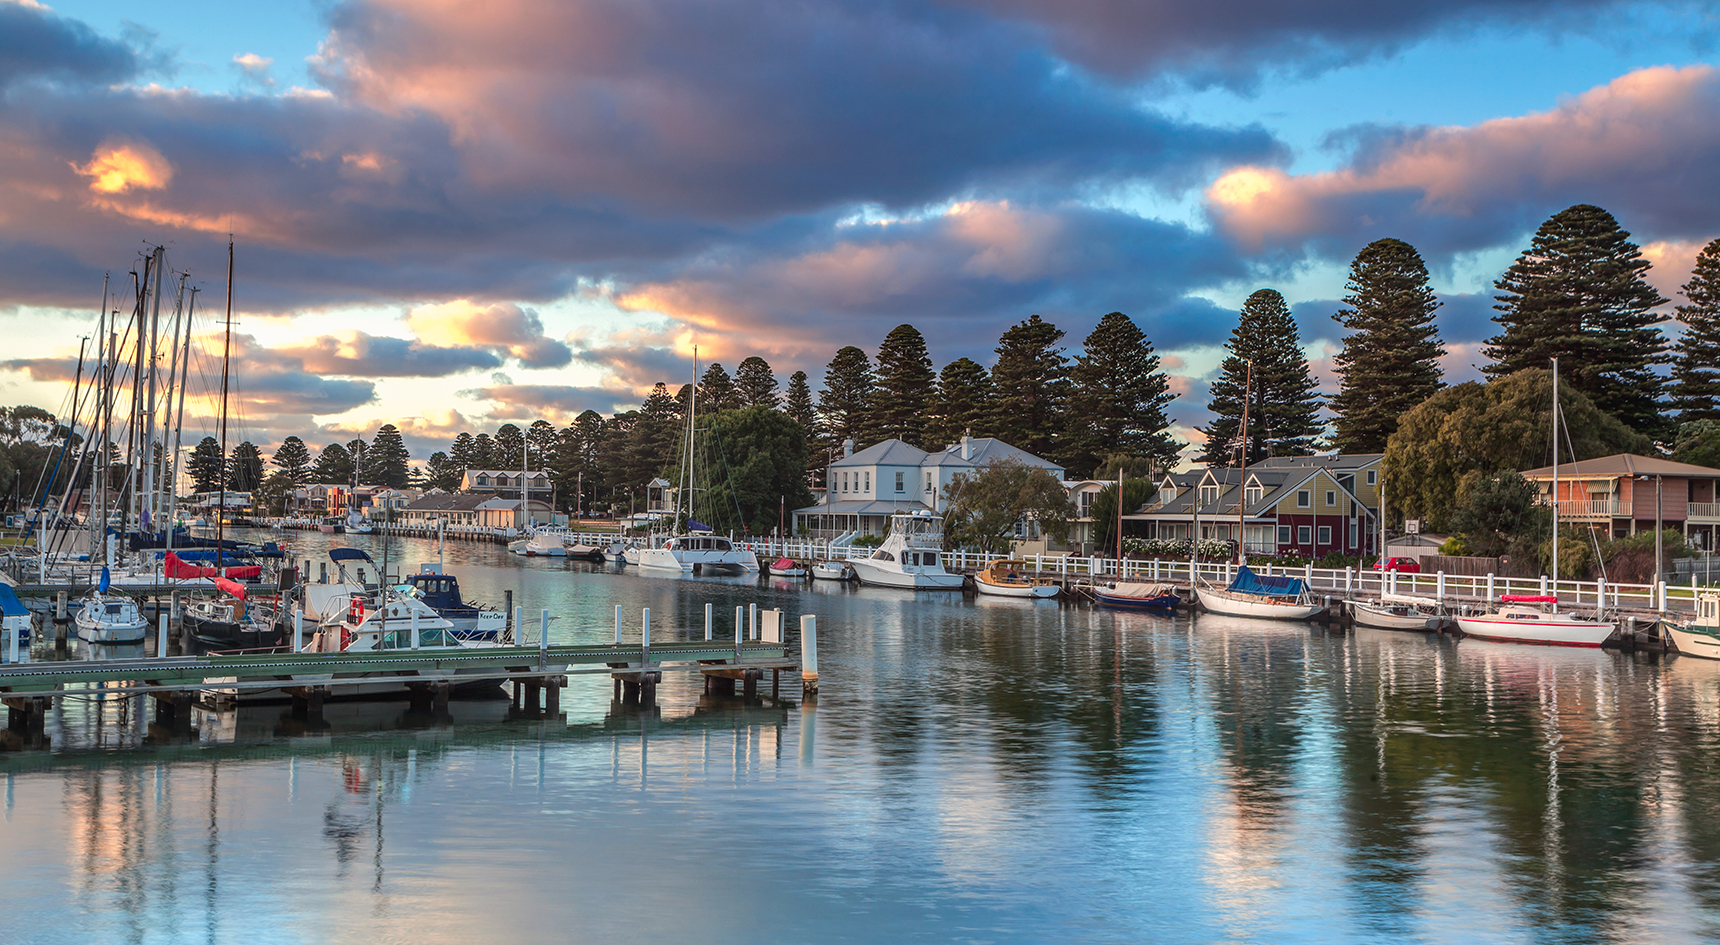 Picture of the wharf in Port Fairy, Victoria